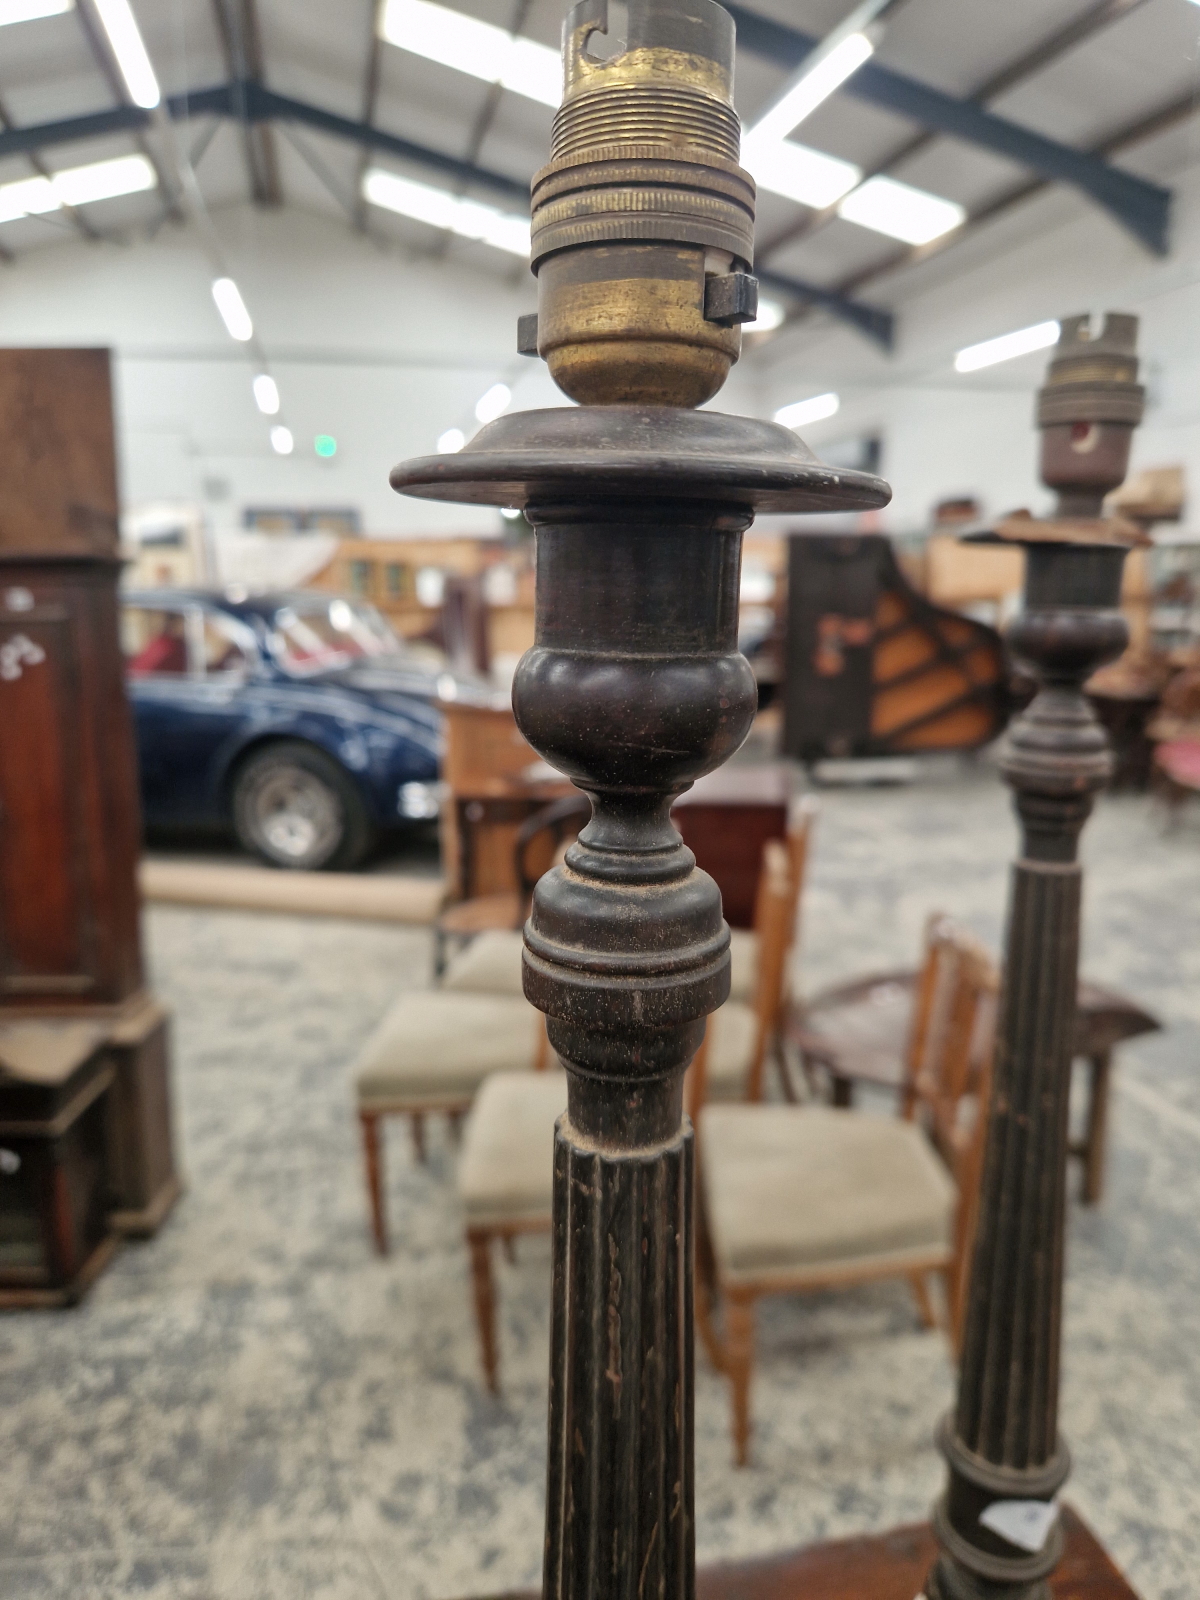 A PAIR OF MAHOGANY REEDED CANDLESTICK TABLE LAMPS - Image 3 of 7